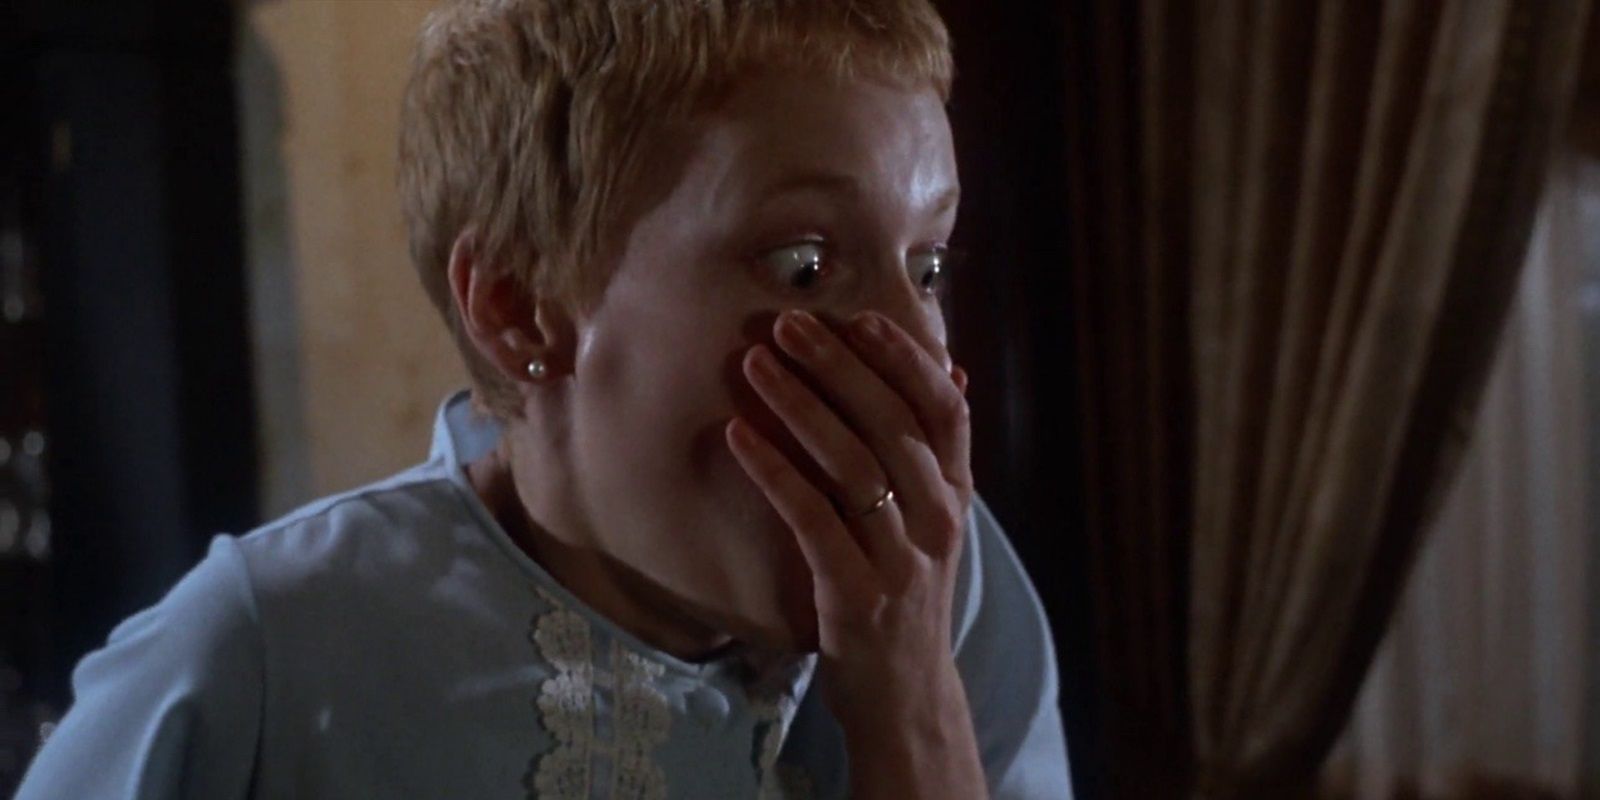 The final shot of Rosemary's Baby